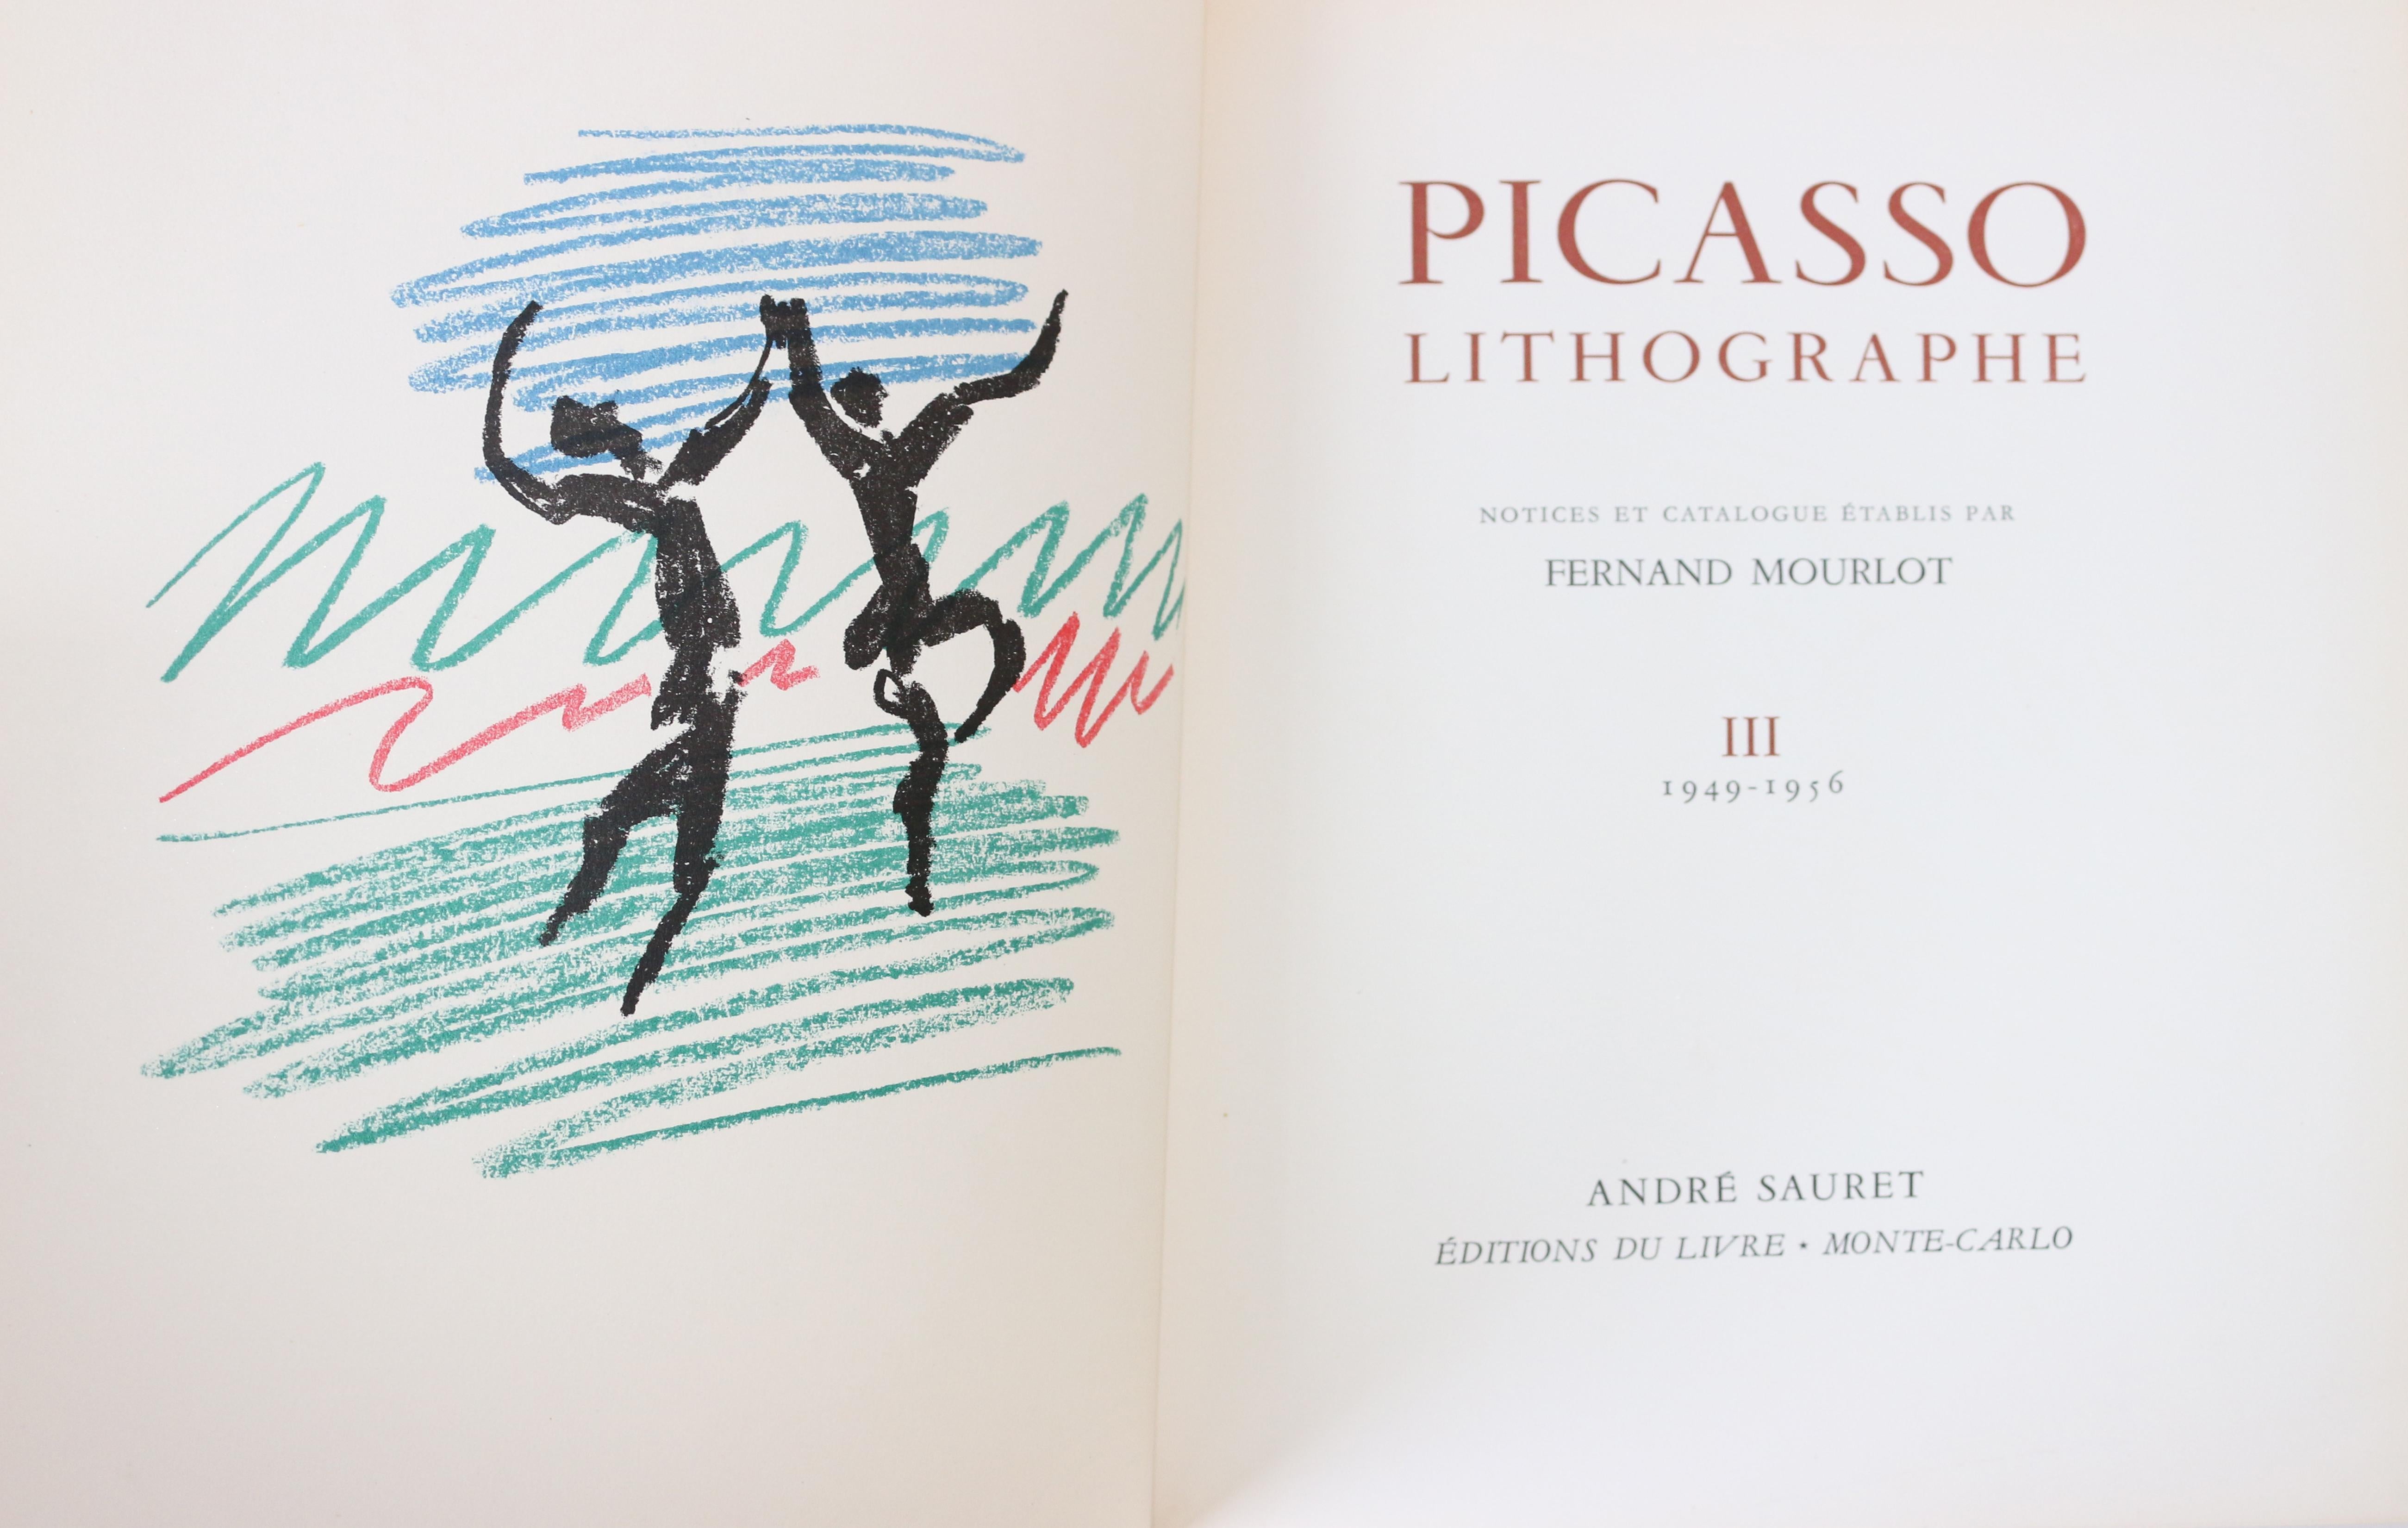 Picasso Lithographe III: 1949-1956 (complete) - Art by Pablo Picasso